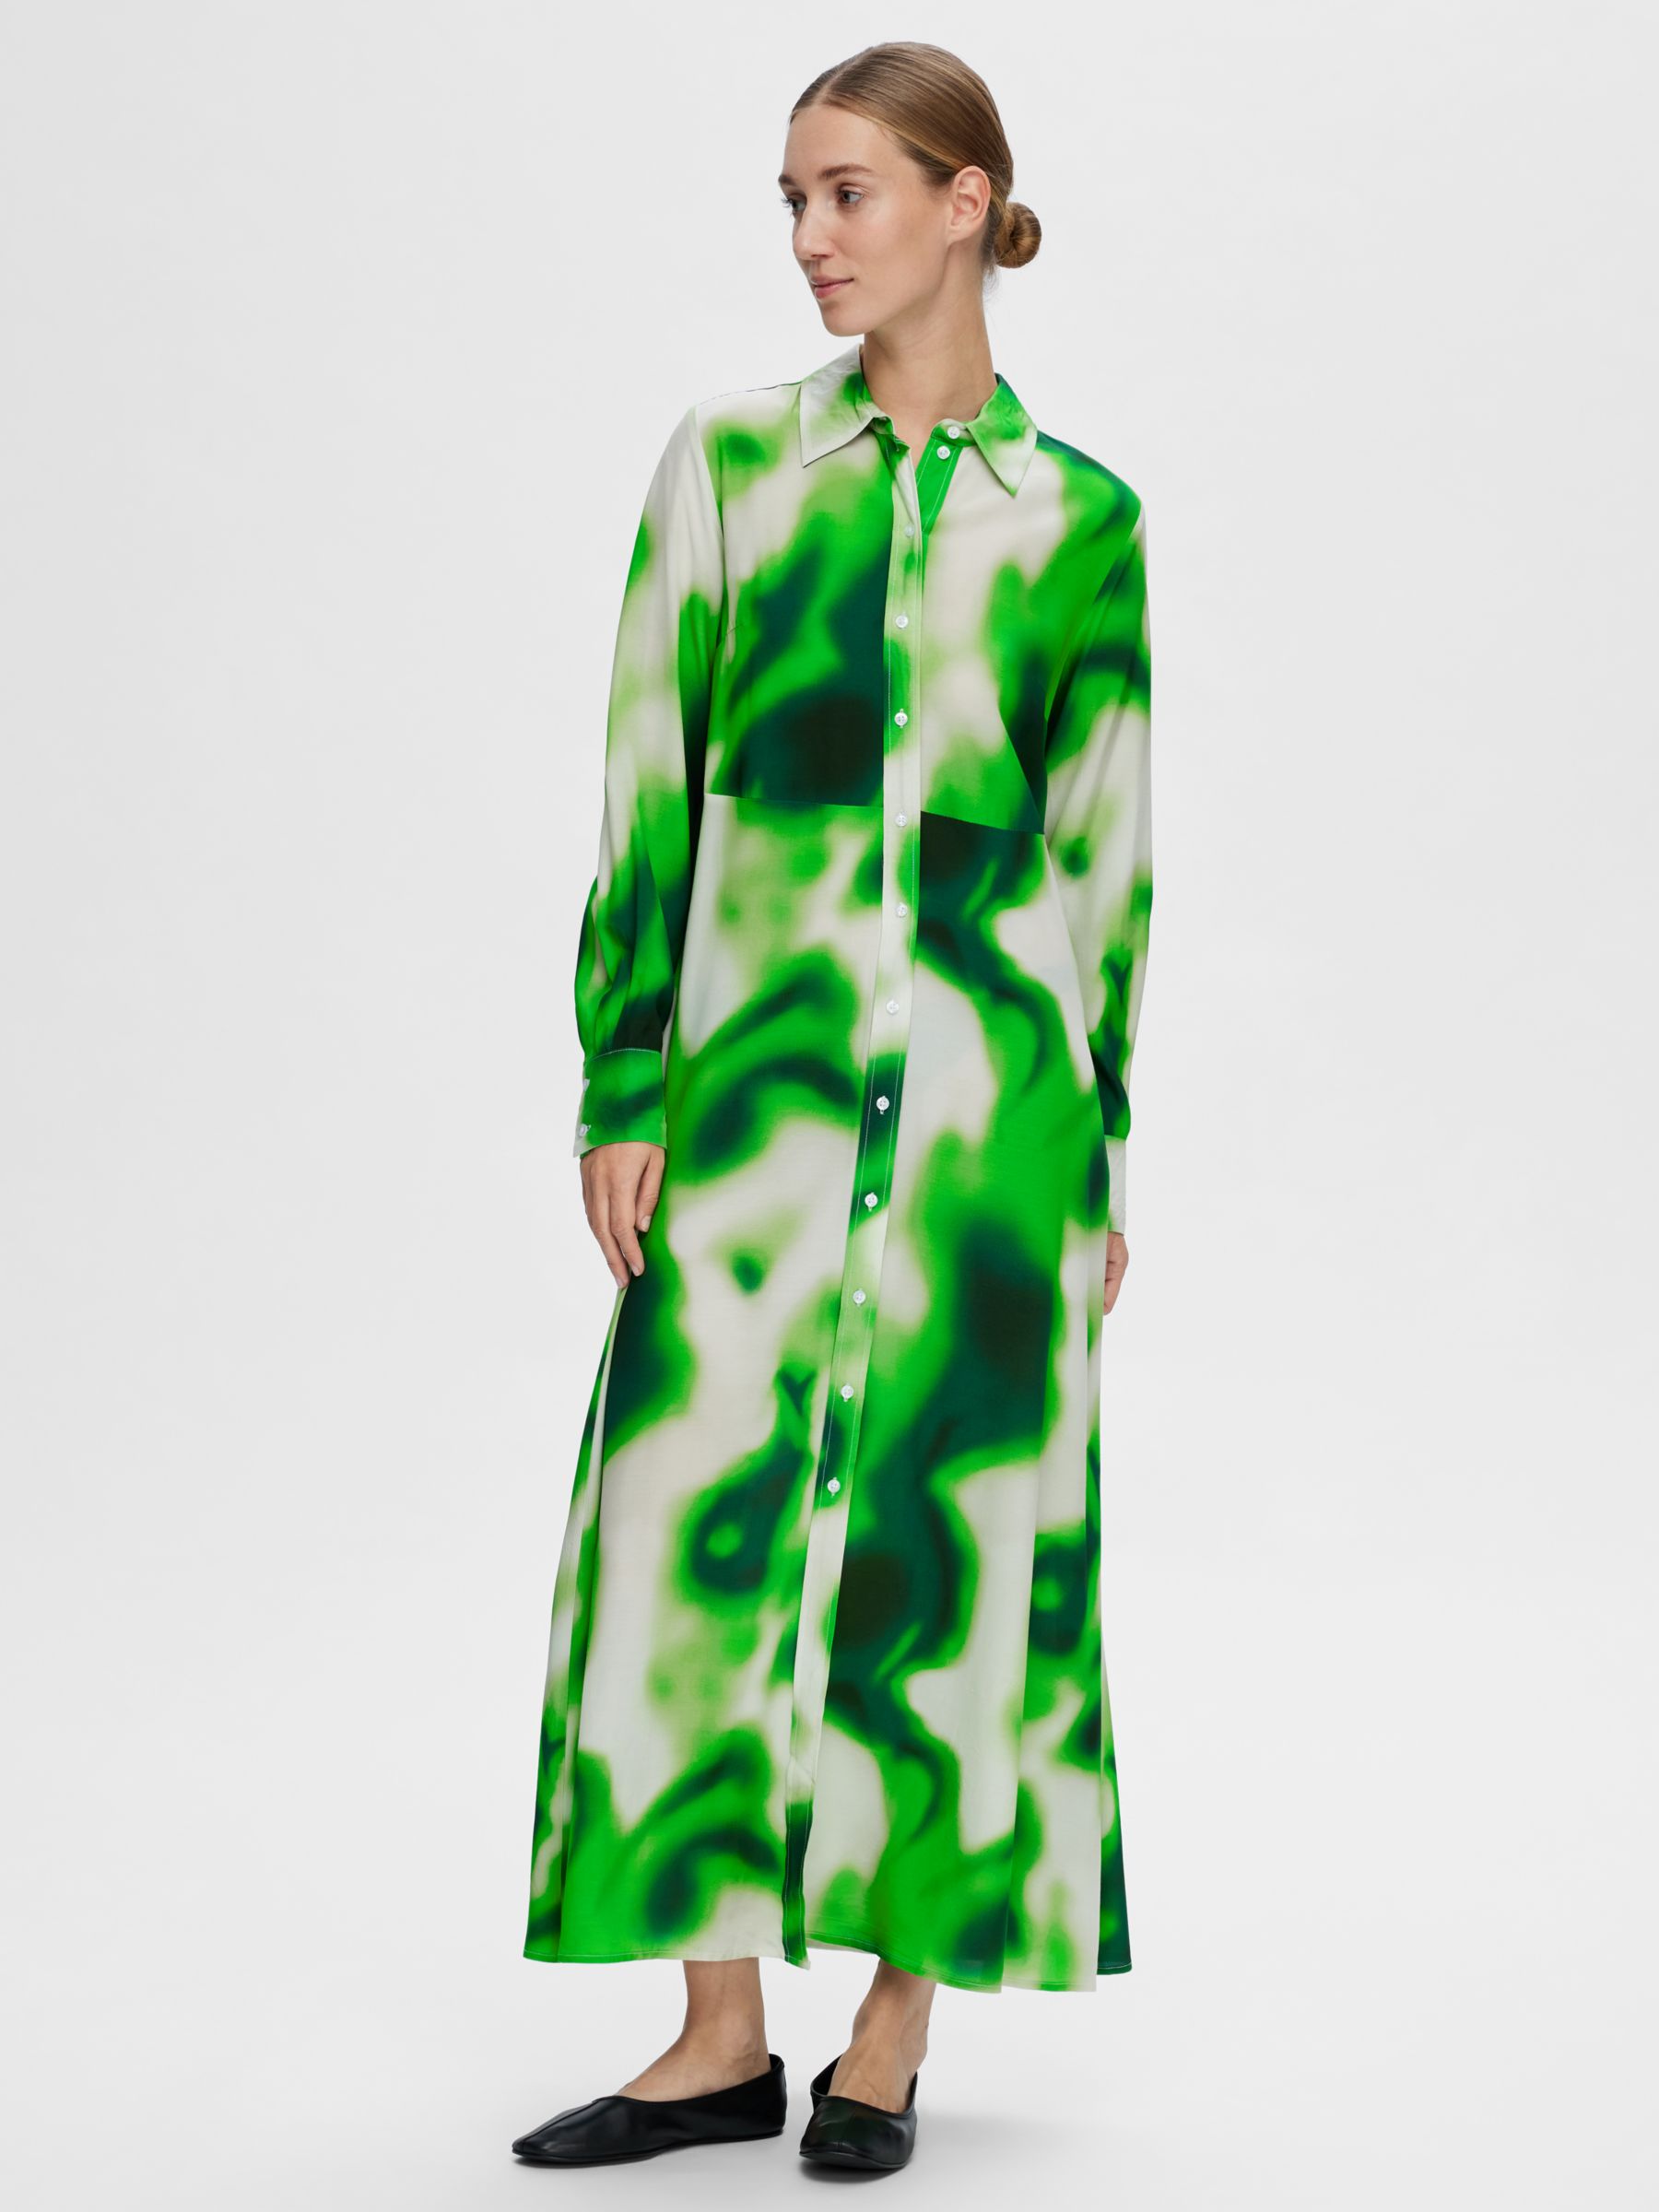 SELECTED FEMME Claudine Abstract Print Maxi Shirt Dress, Green/Multi, 34